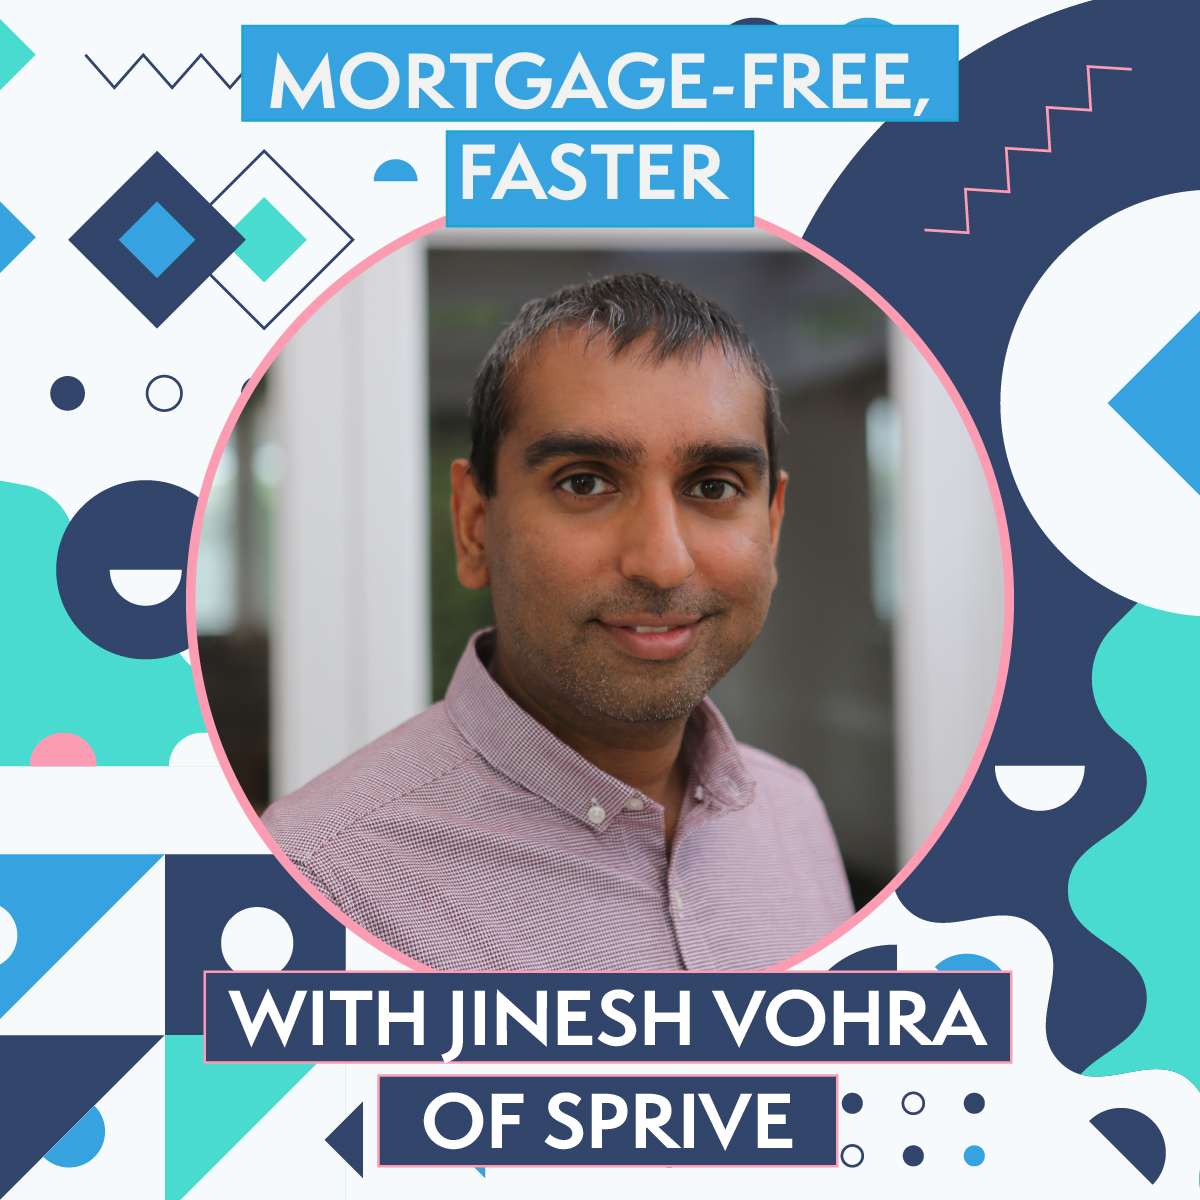 Mortgage-Free, Faster with Sprive